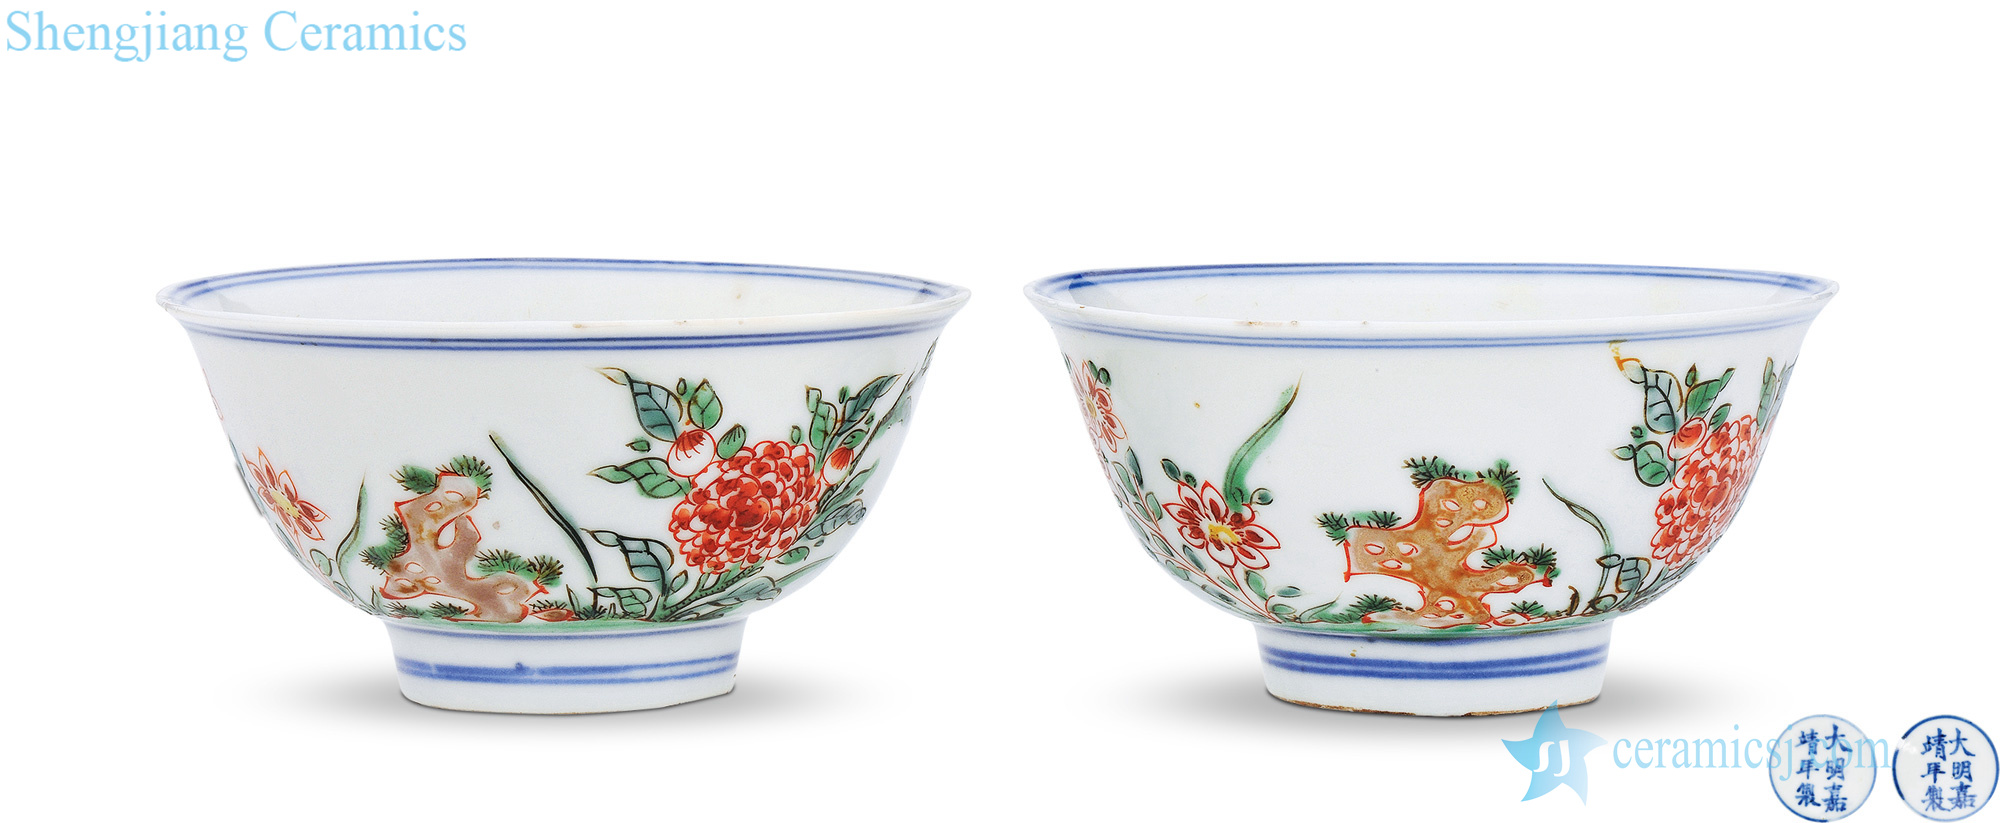 The qing emperor kangxi Colorful flowers and birds grain cup (a)